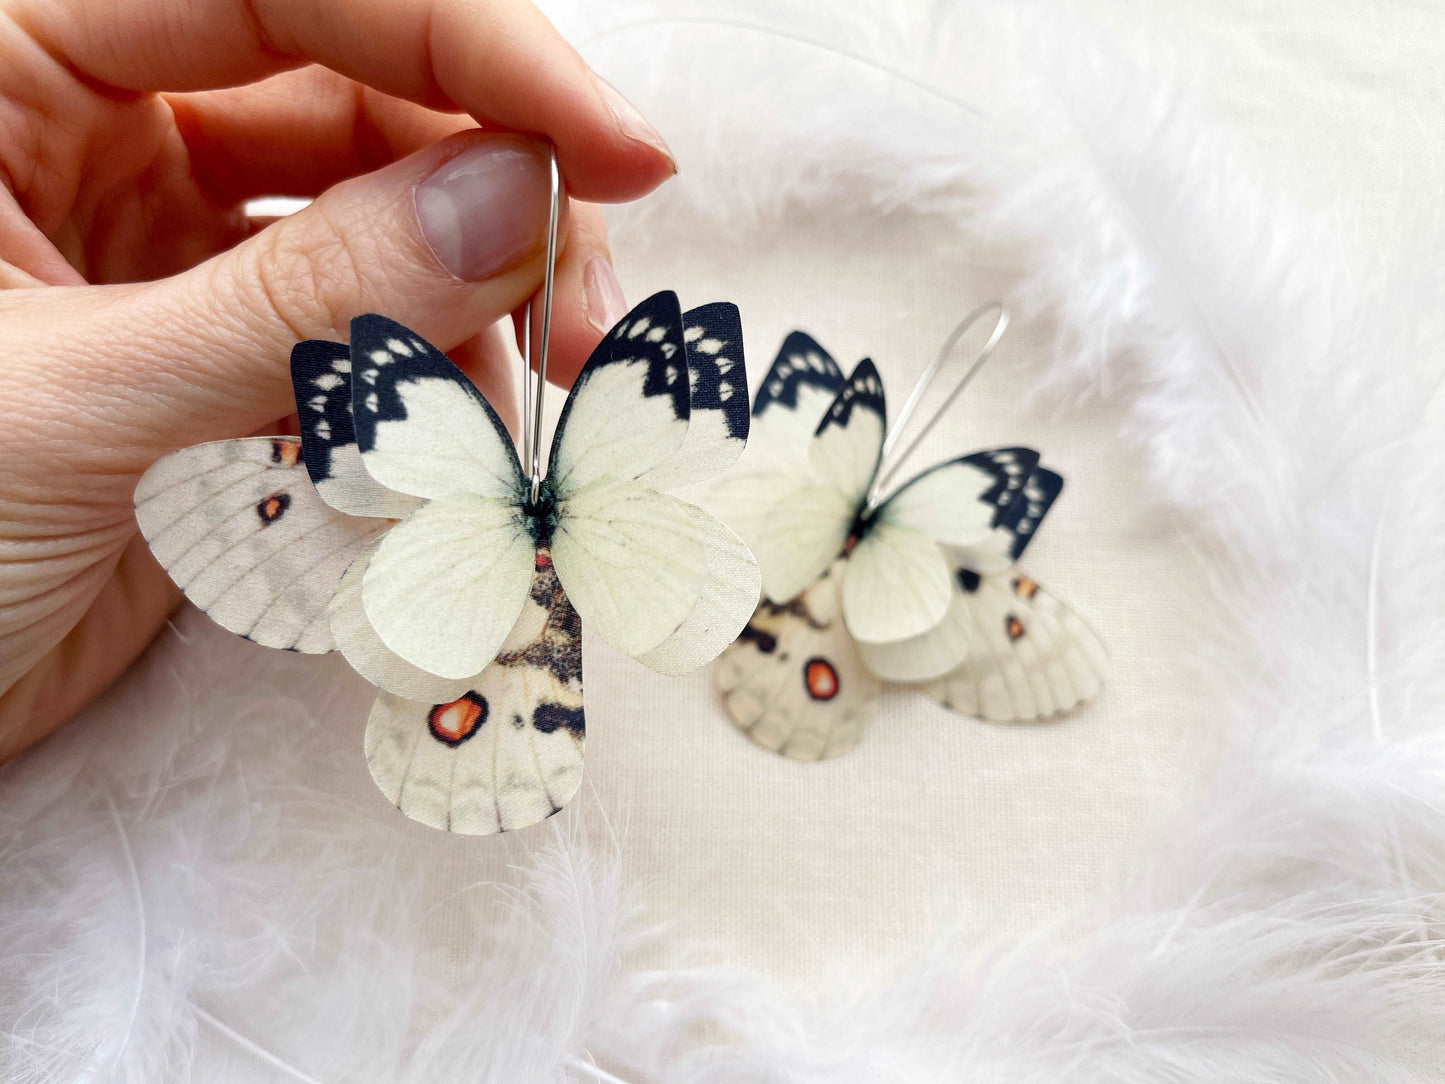 Boho chic mismatched ivory earrings with butterfly wings